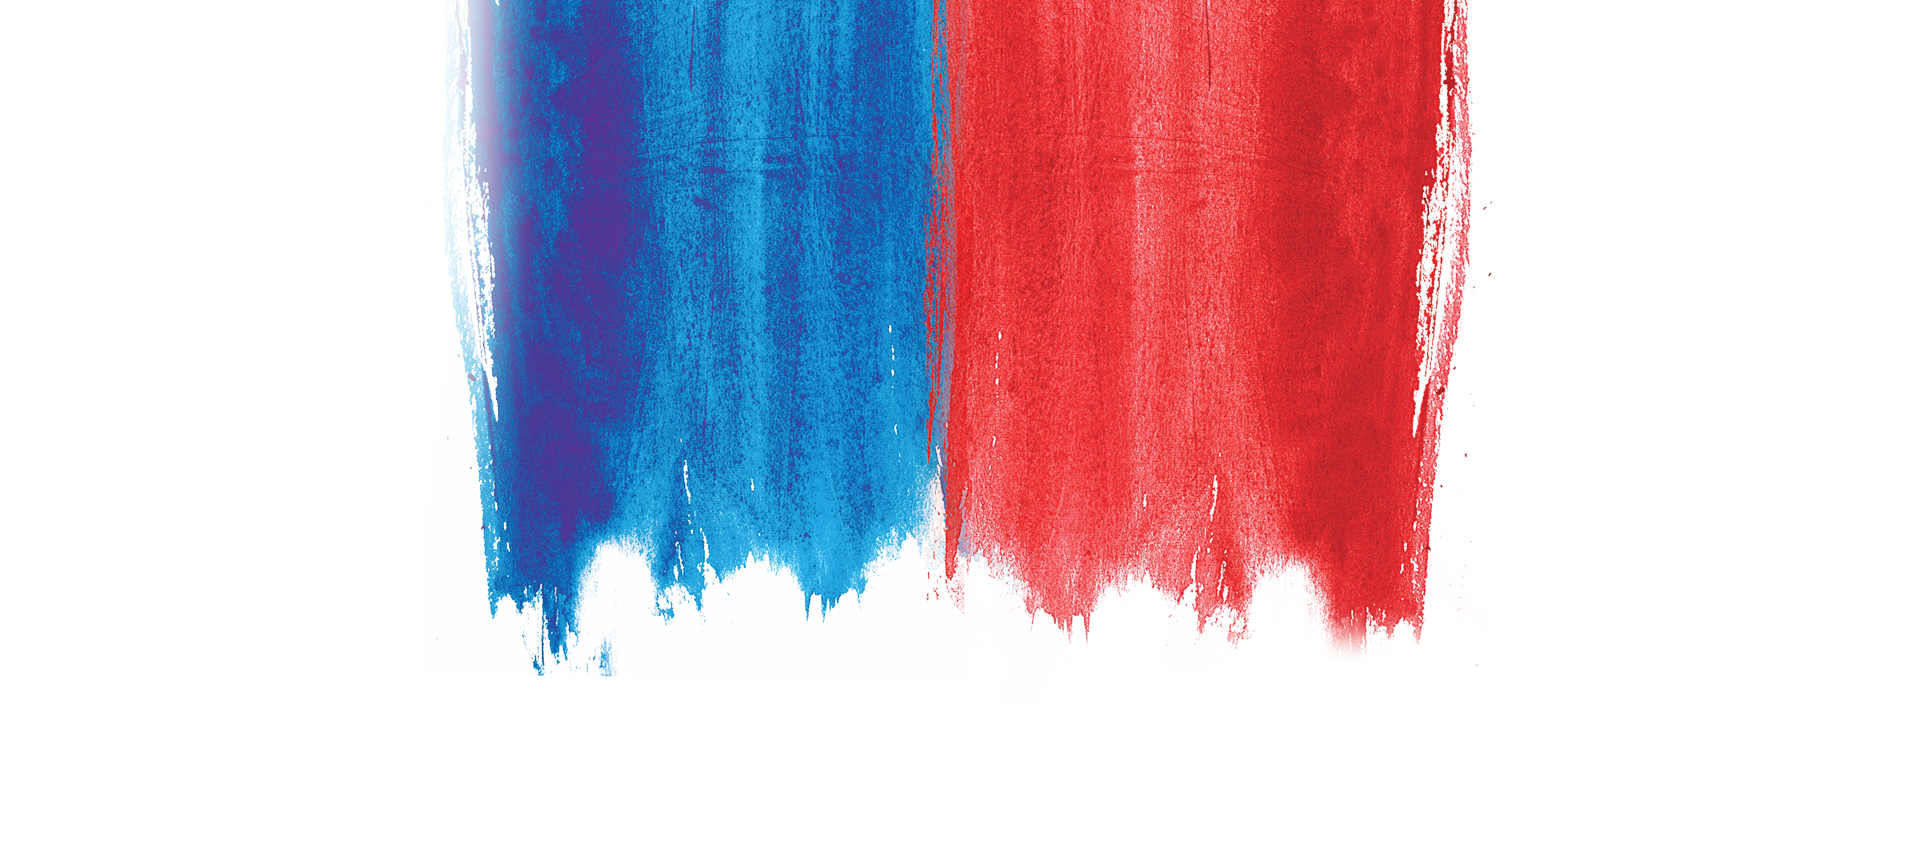 red white and blue background